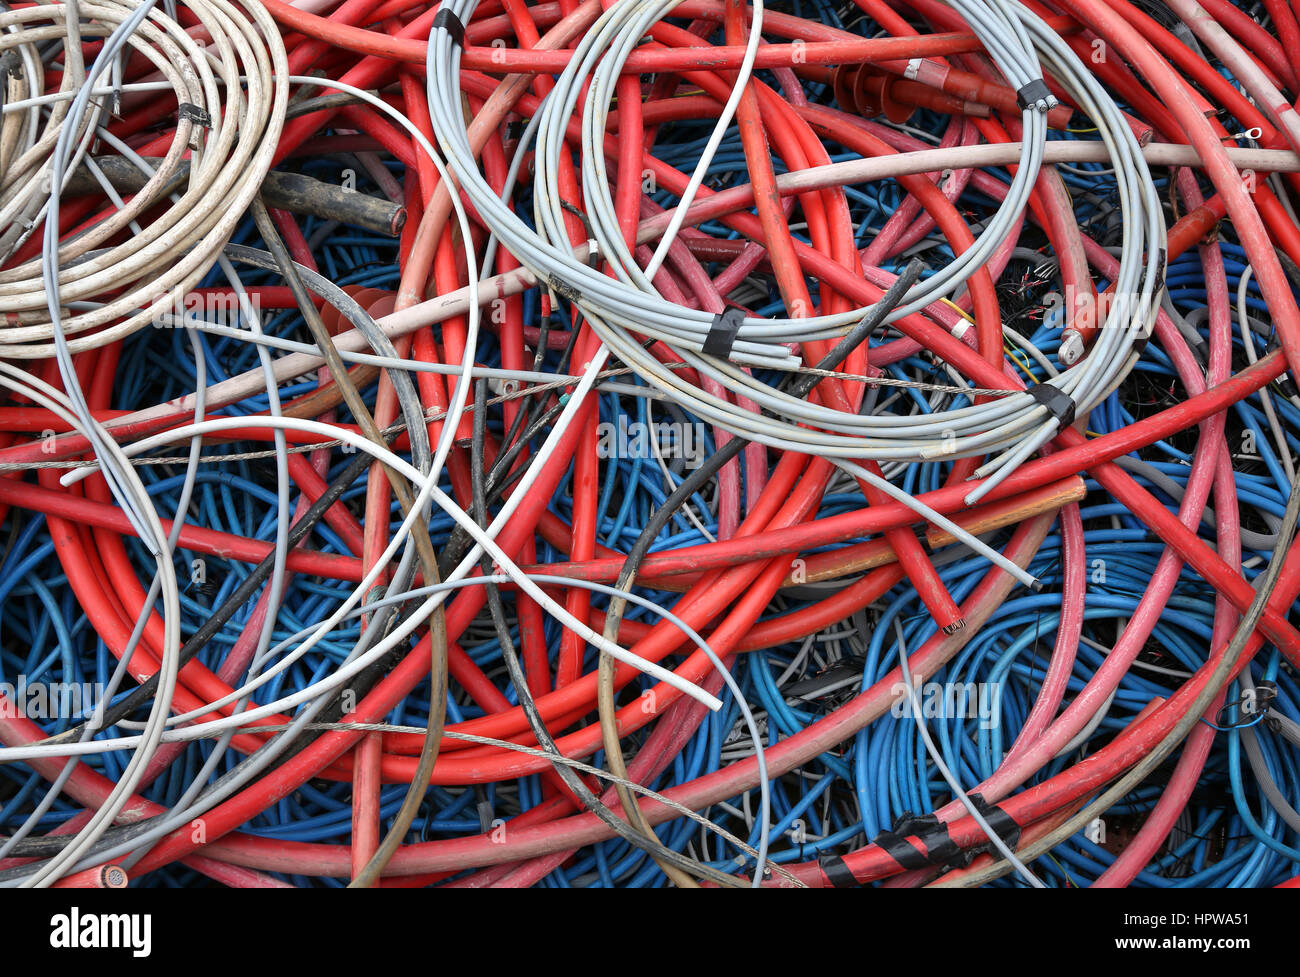 old high-voltage electric cables and other power cords in a special waste collection centre Stock Photo